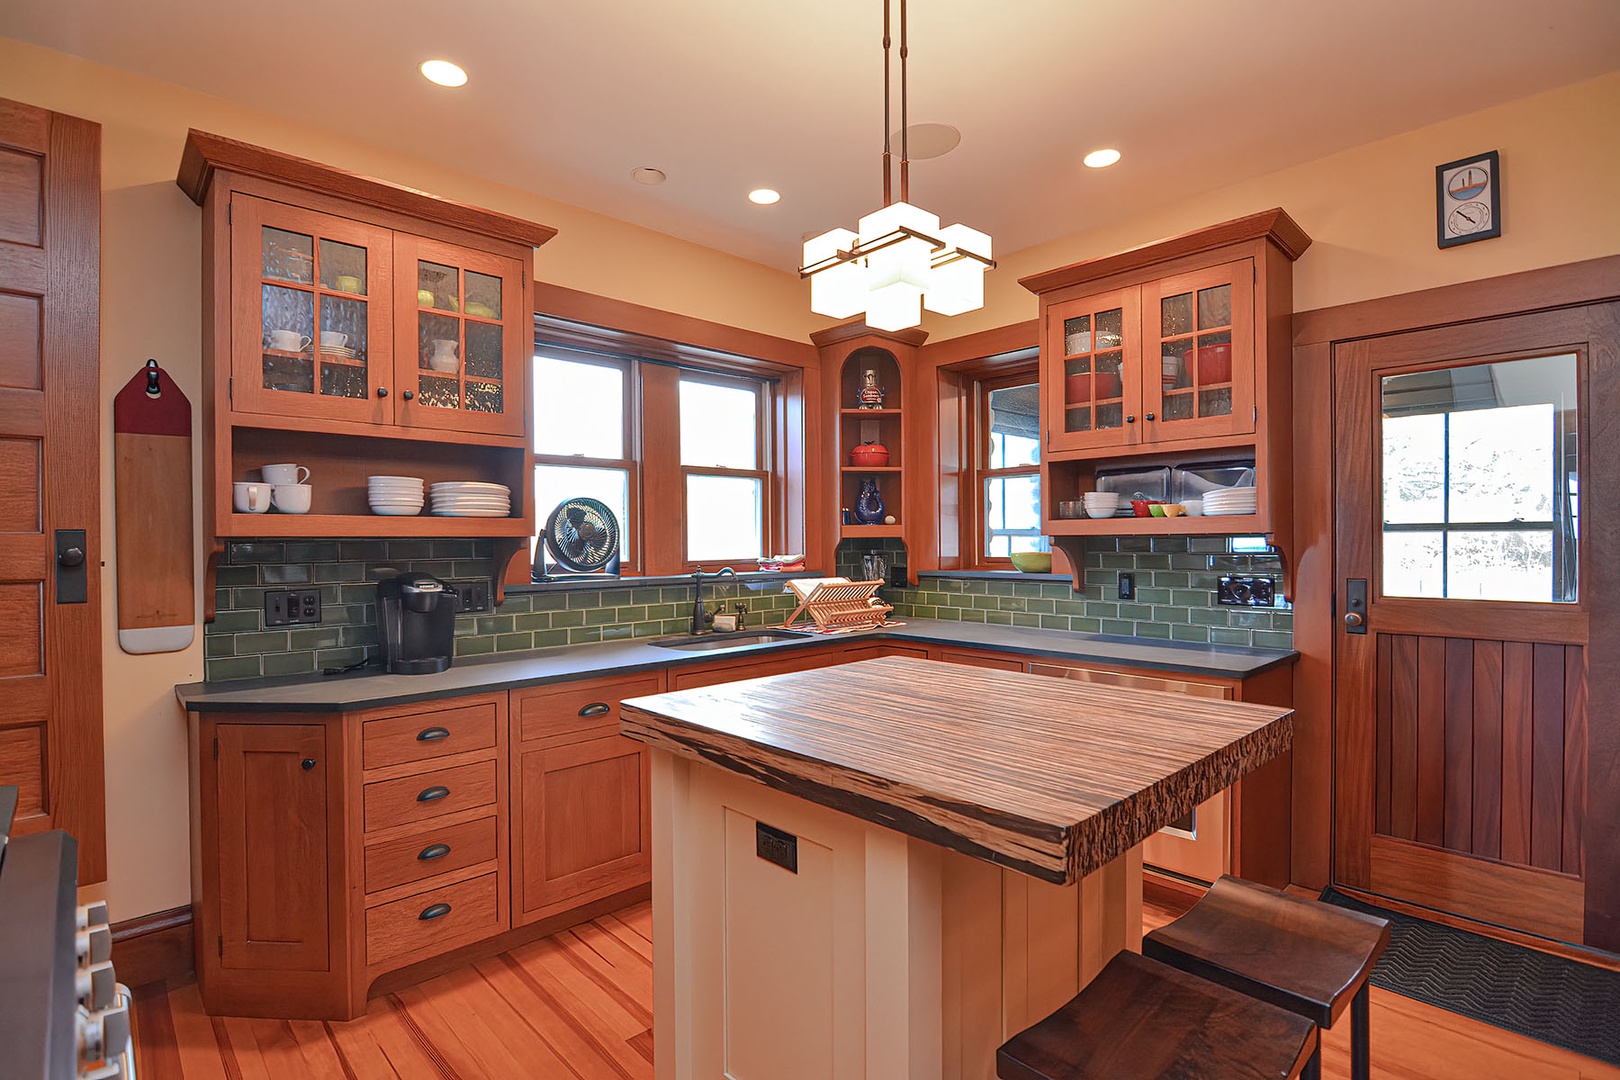 The kitchen has beautiful wood cabinetry and slate countertops.